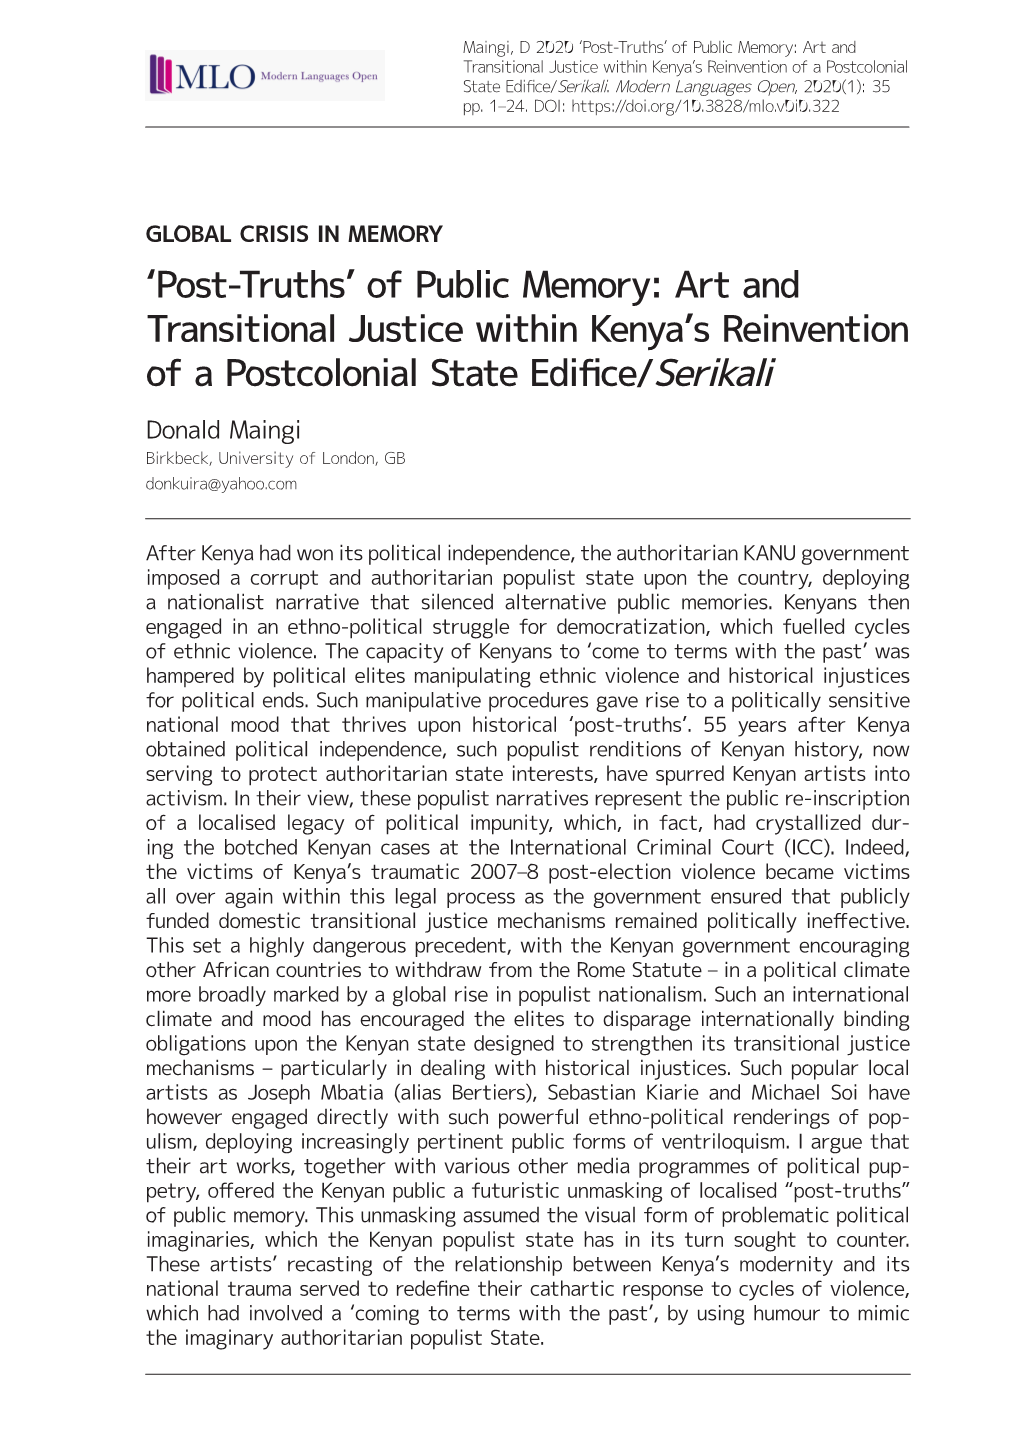 'Post-Truths' of Public Memory: Art and Transitional Justice Within Kenya's Reinvention of a Postcolonial State Edifice/Se